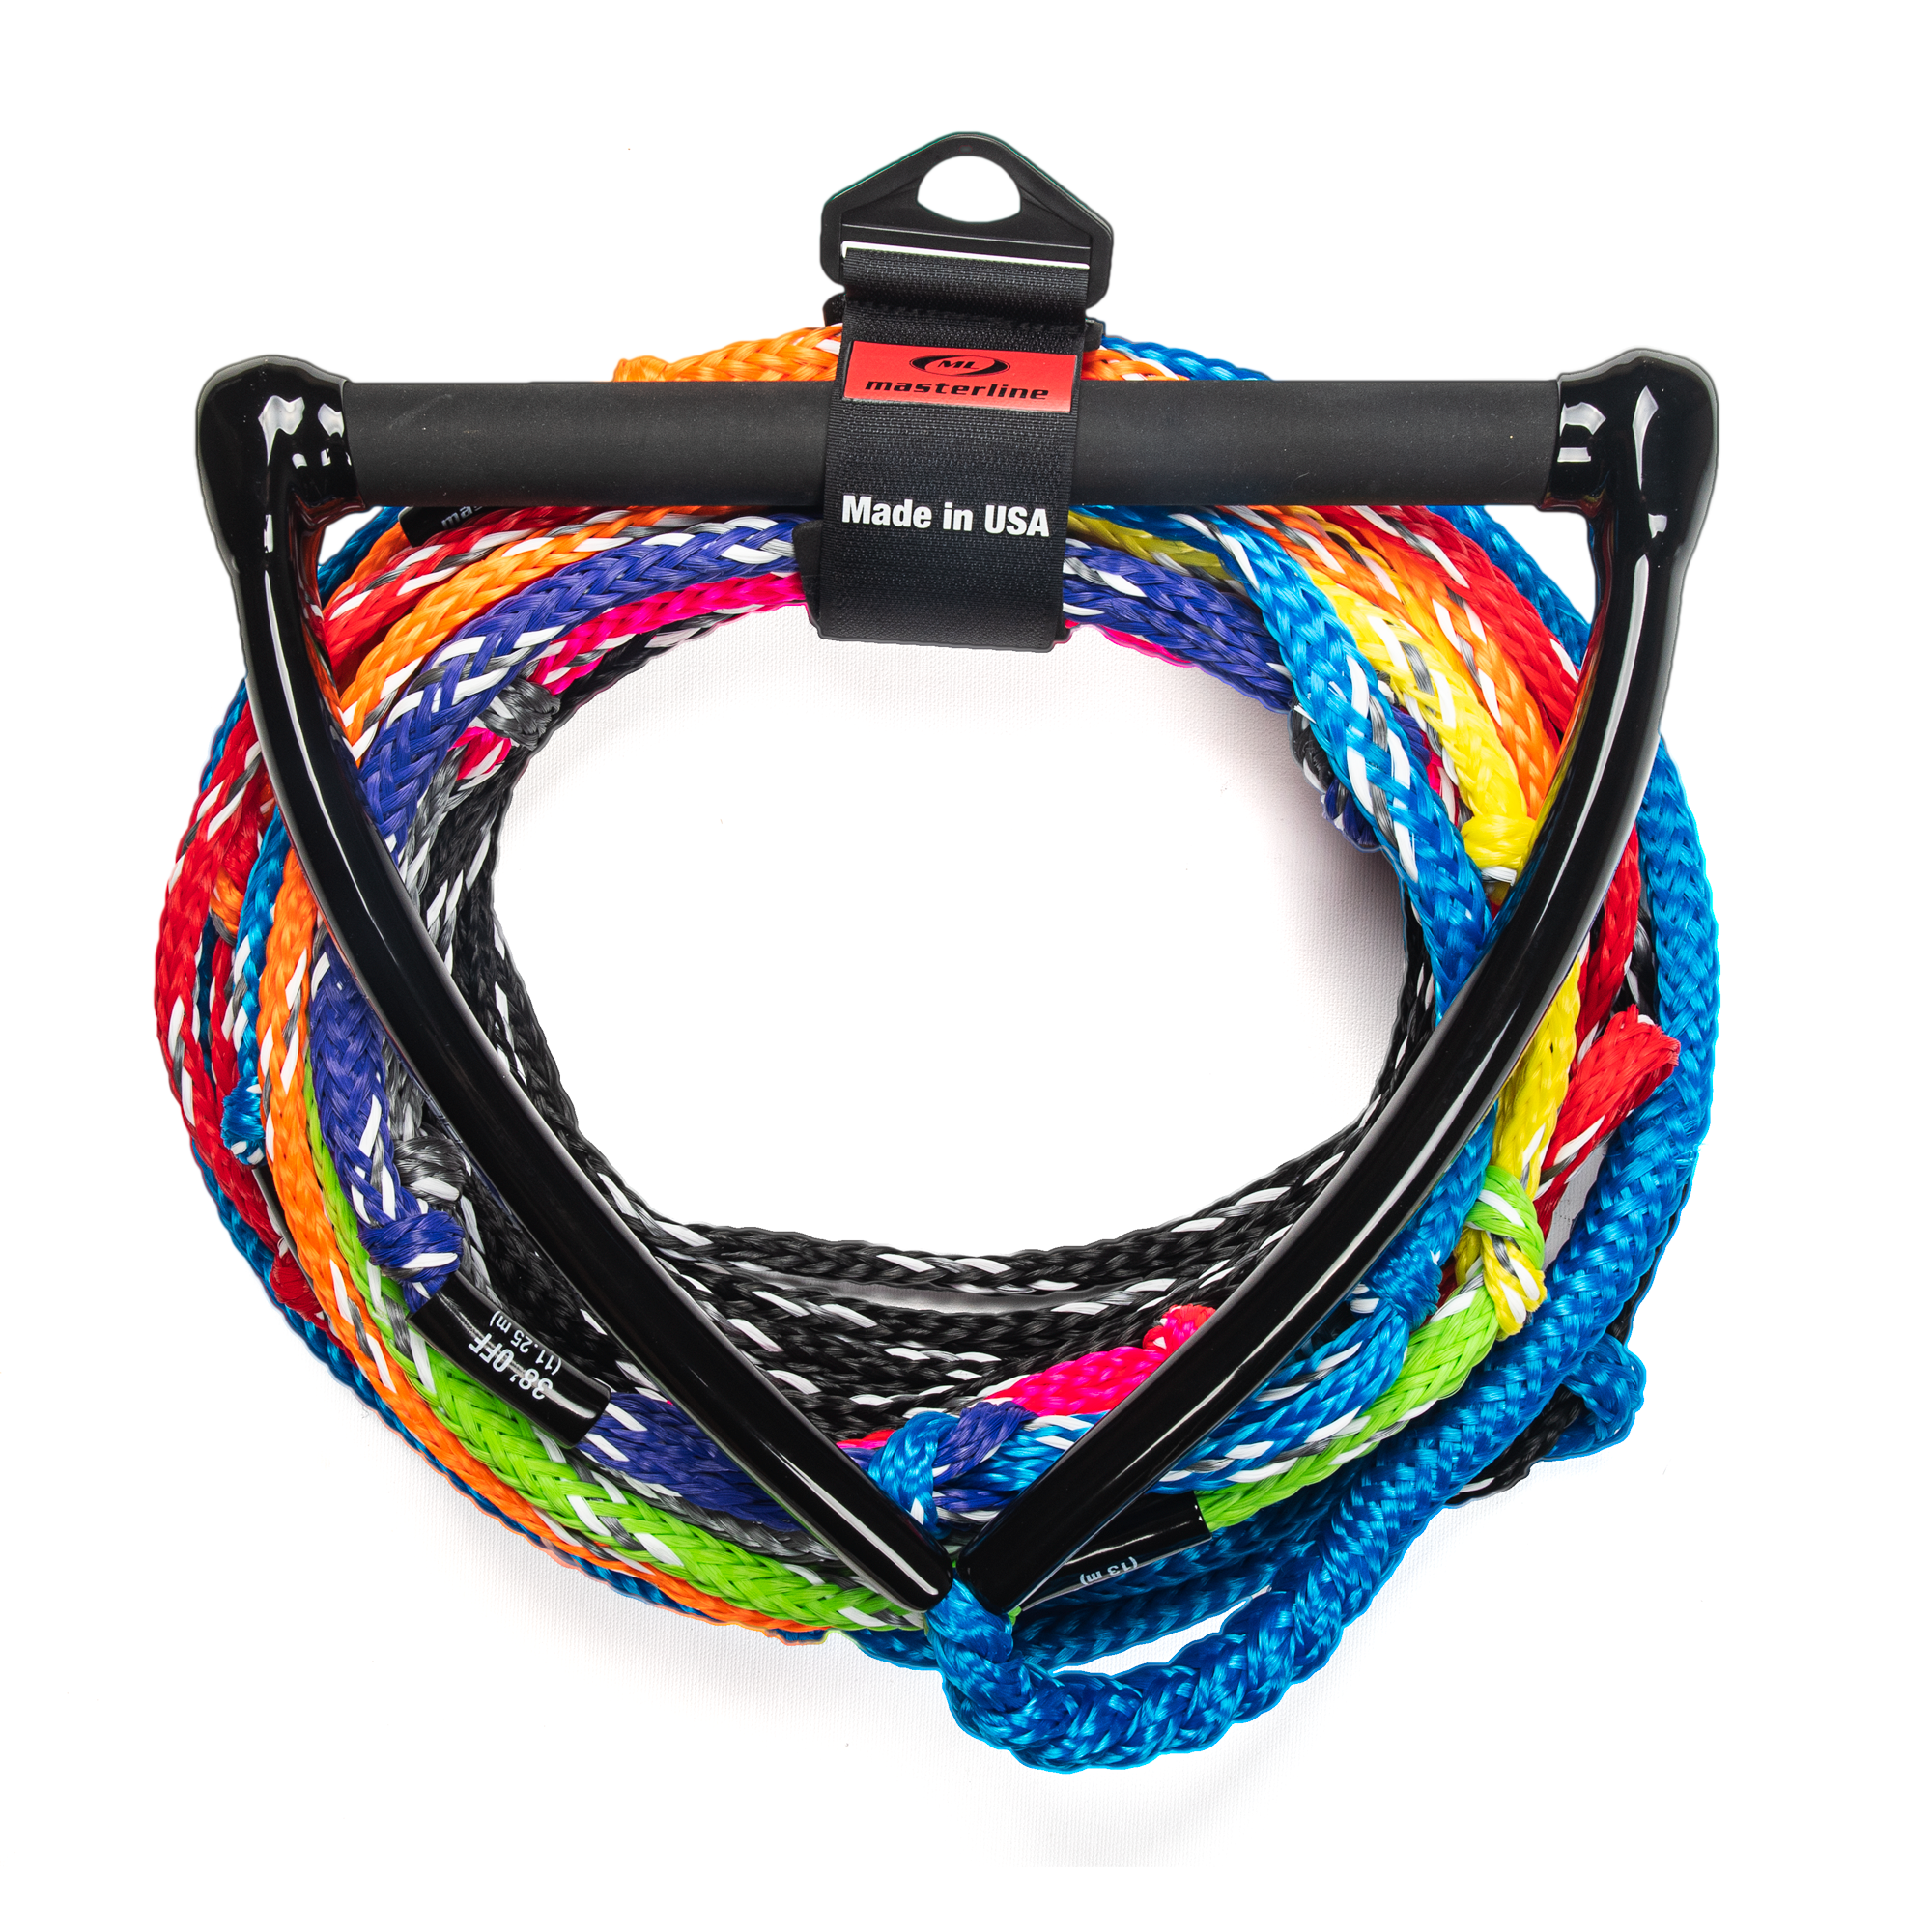 Monster Team Handle & Dlx 9.75m "Pro" Mainline Water Ski Rope (9 Section)